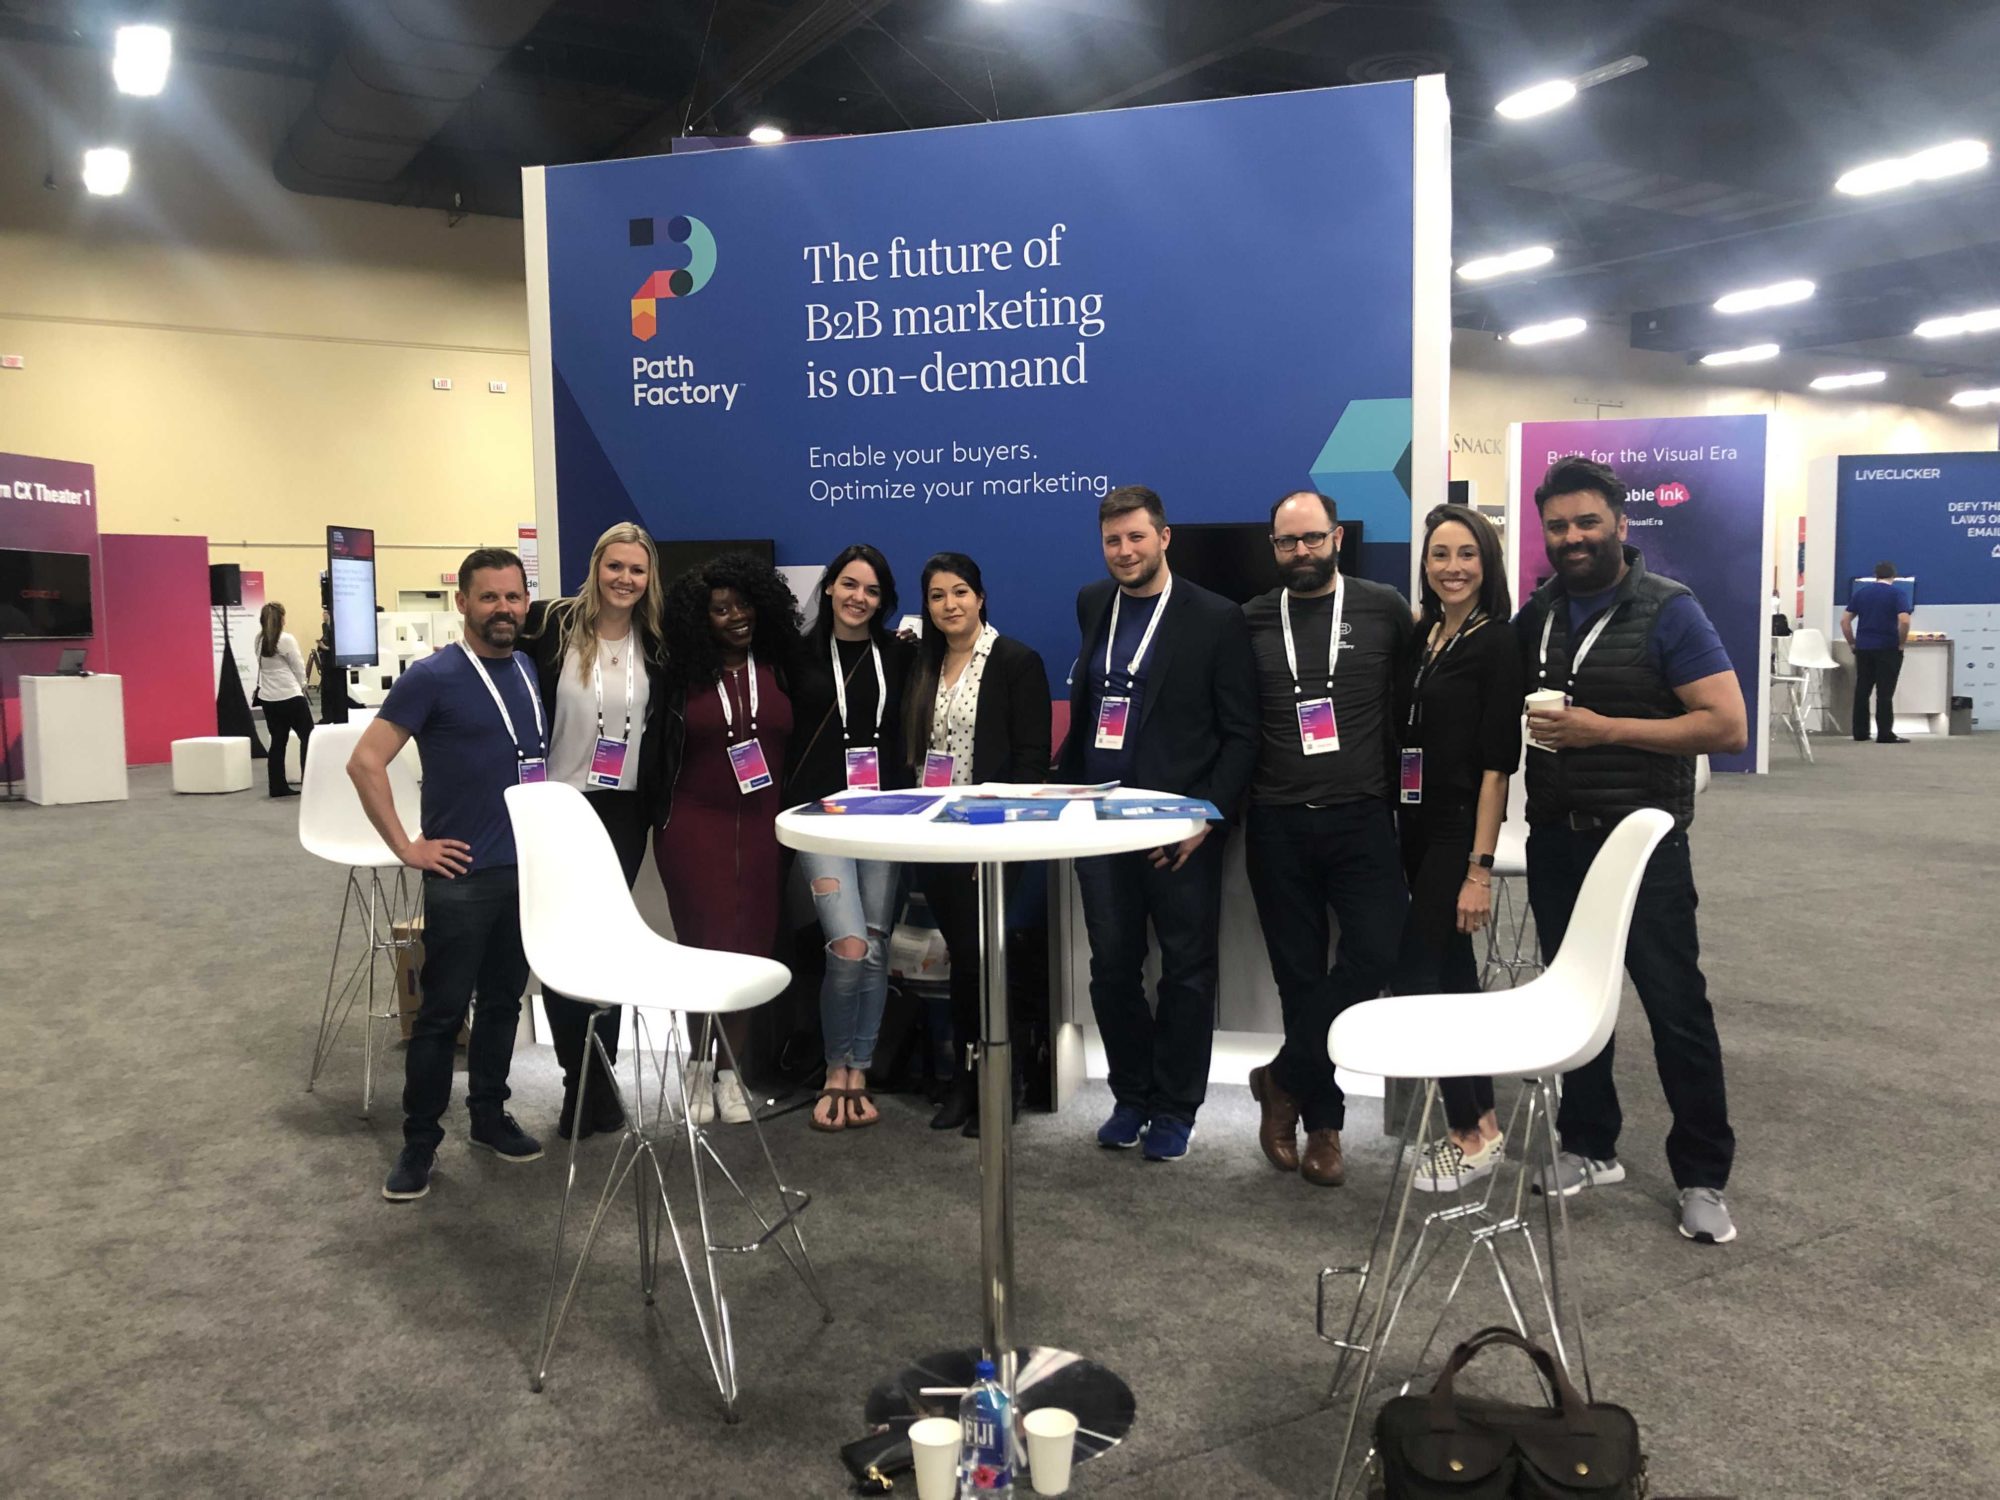 Photograph of PathFactory Employees at an Event with a sign in the background that says:  The future of B2B marketing is on-demand, Enable your buyers.  Optimize your marketing